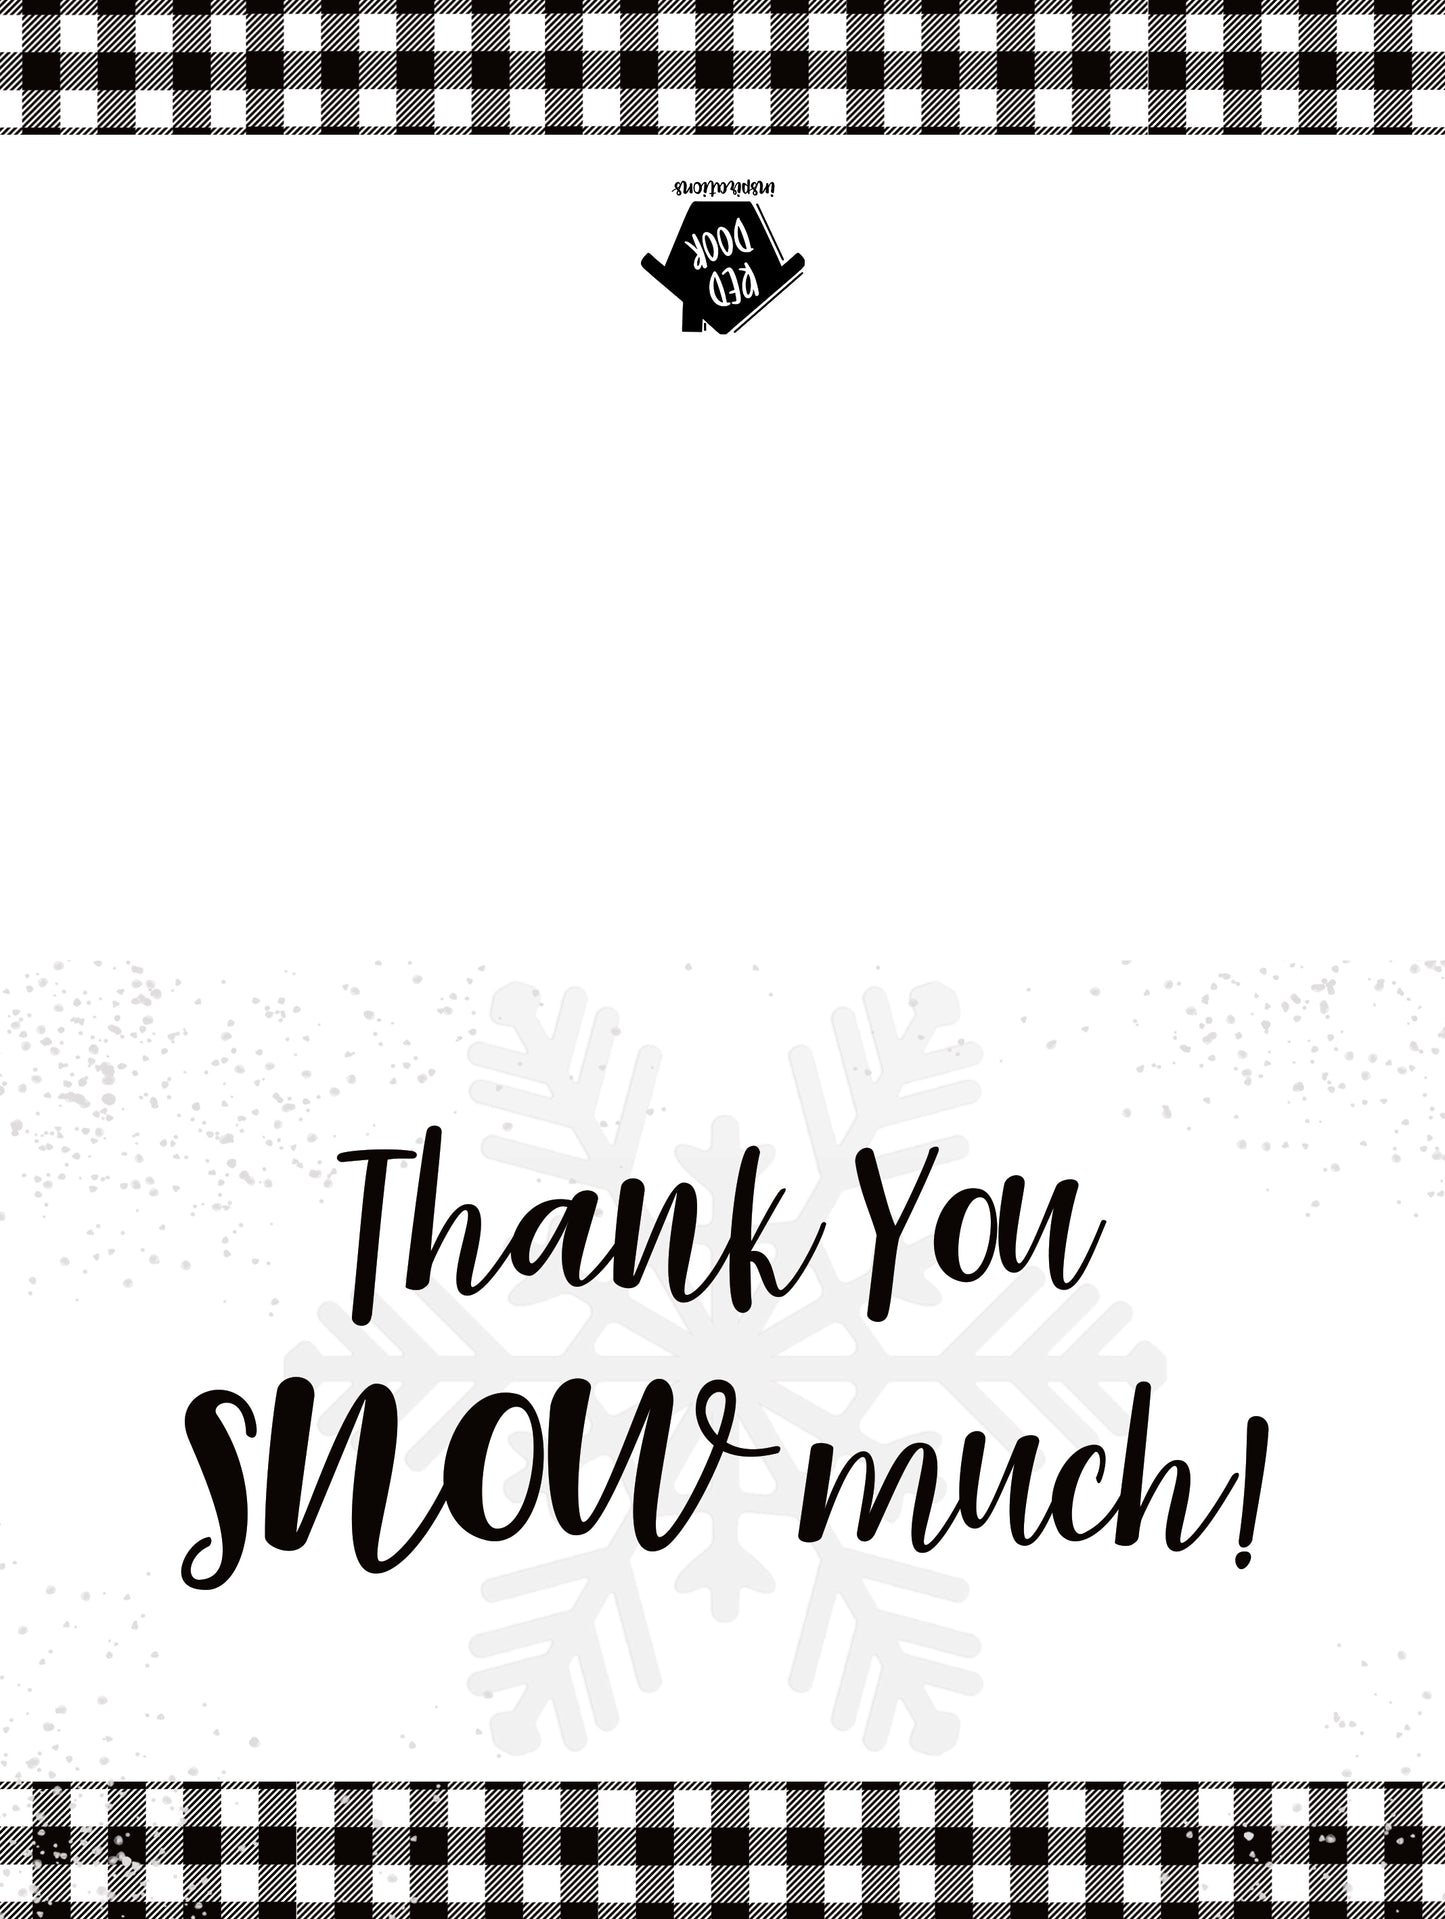 Thank you Snow Much - Included 25 cards